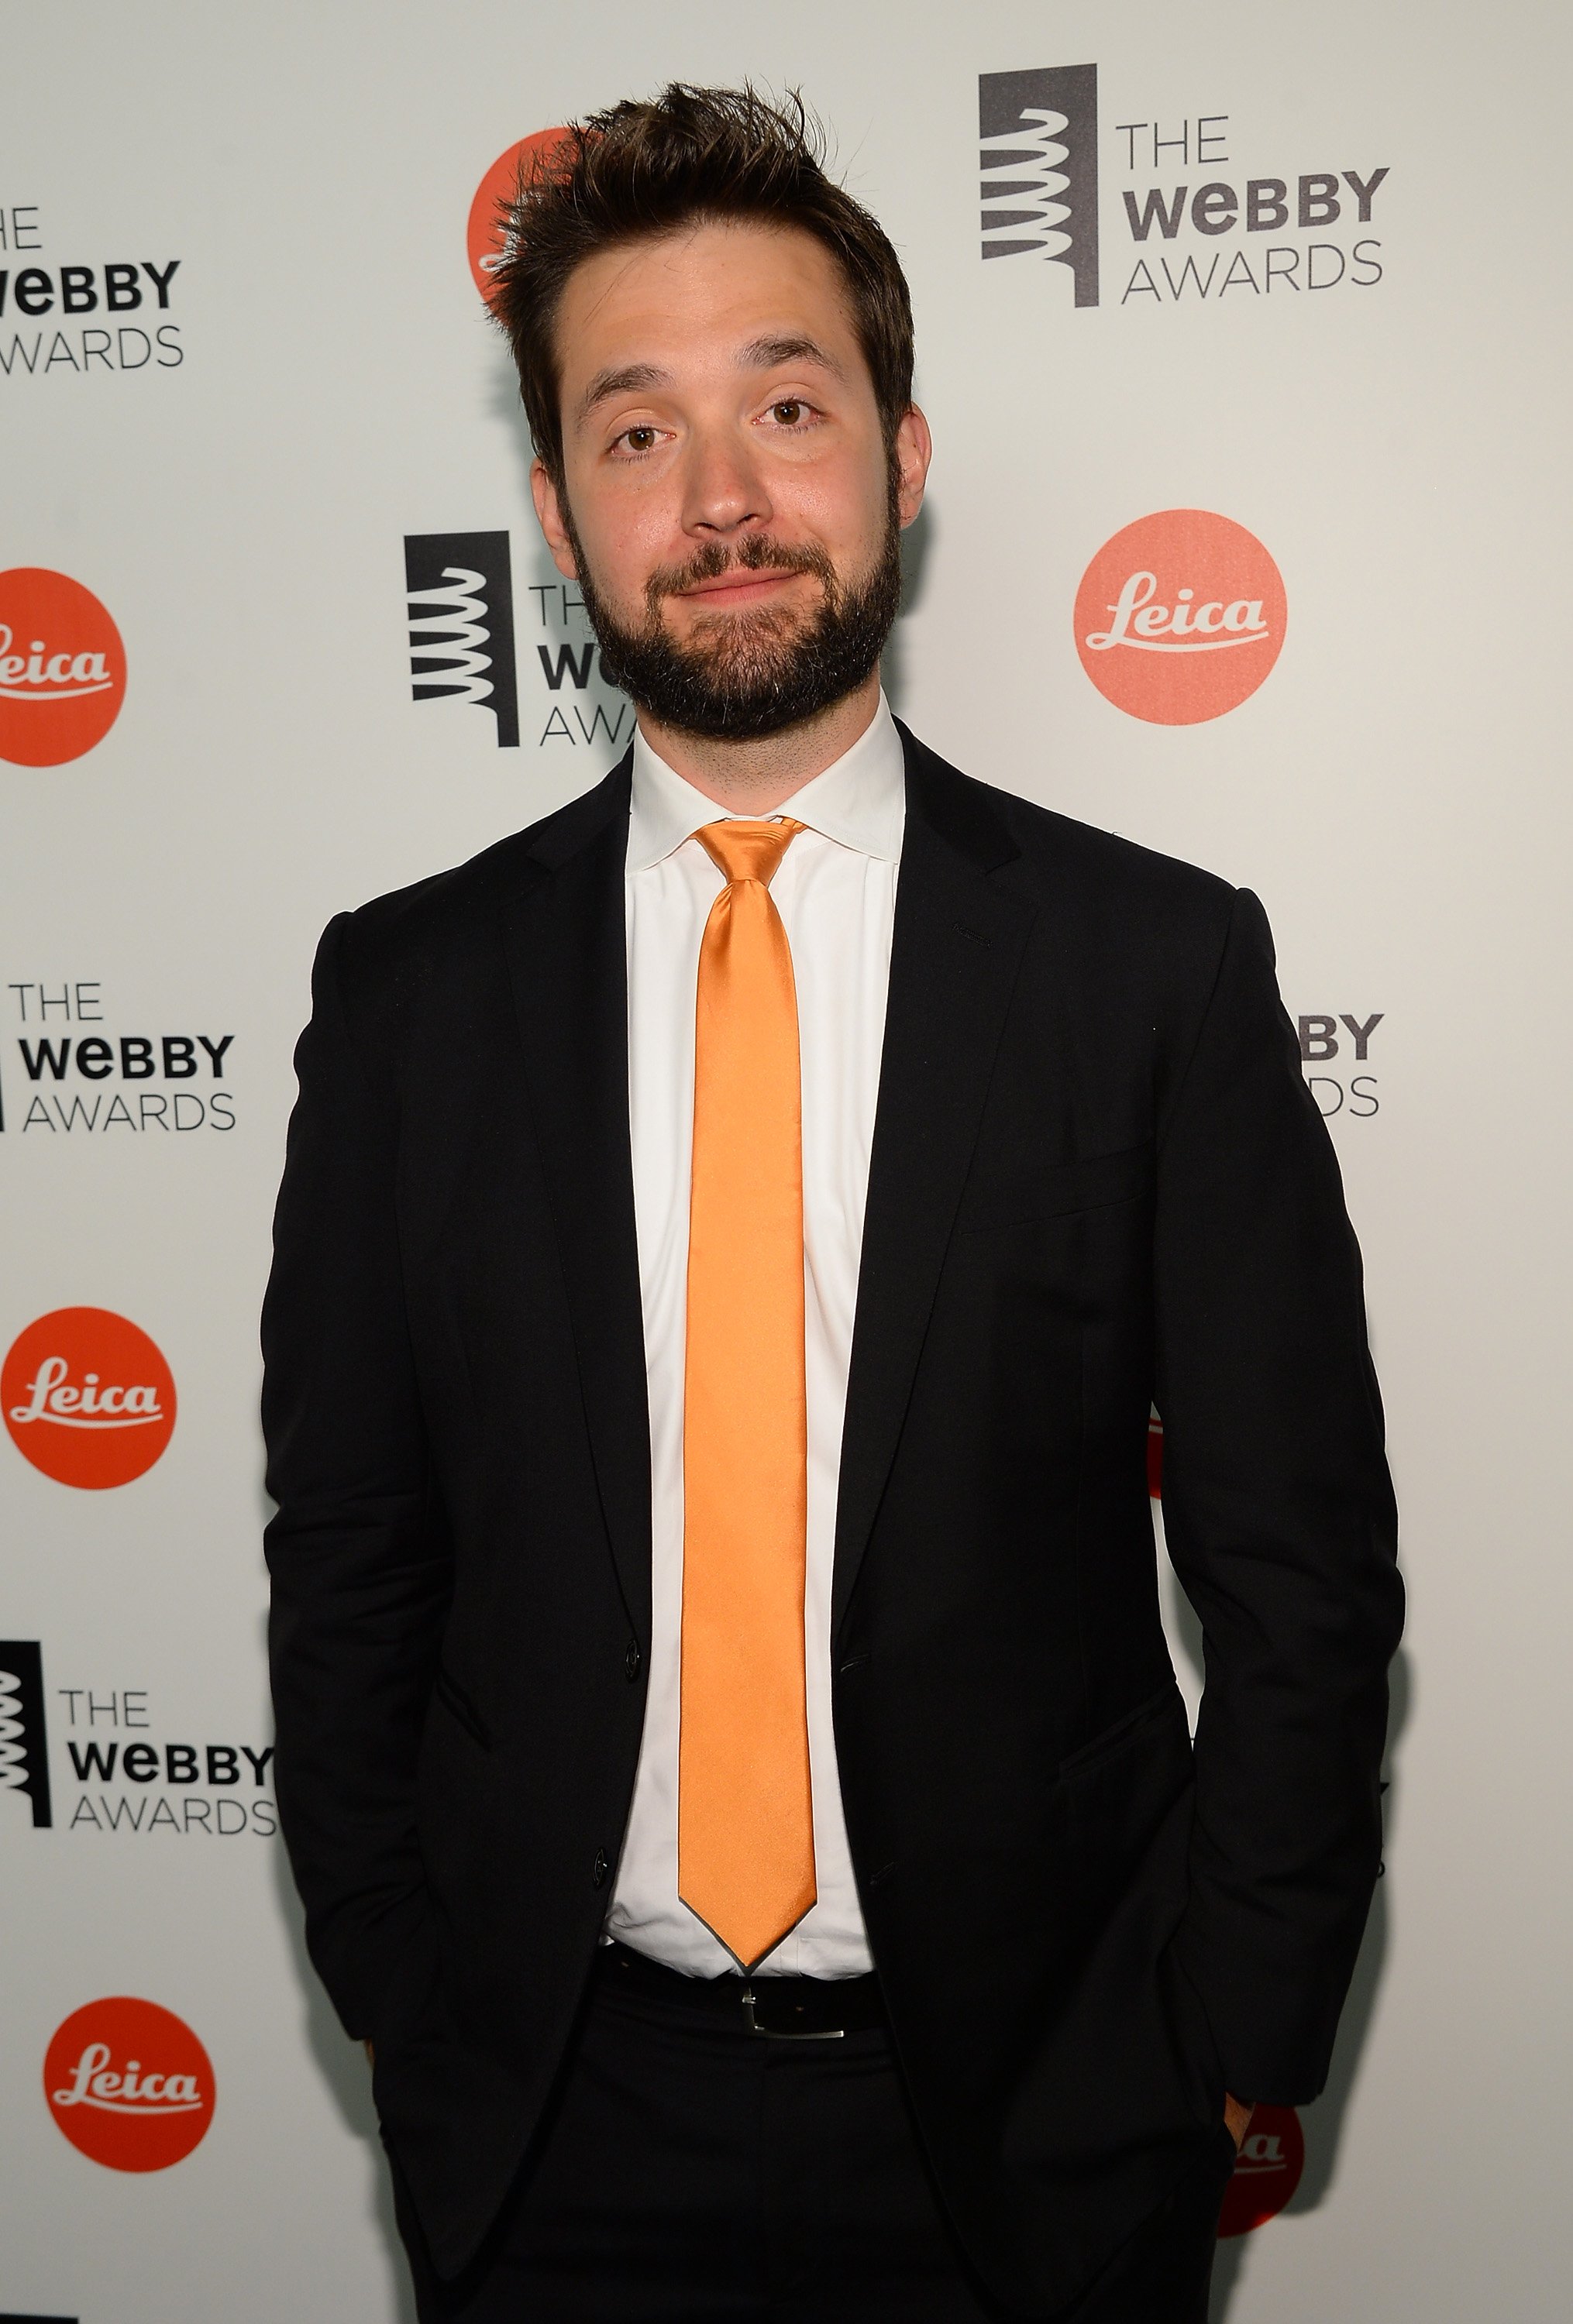 Alexis Ohanian poses backstage at the 18th Annual Webby Awards on May 19, 2014 | ¨Photo: GettyImages